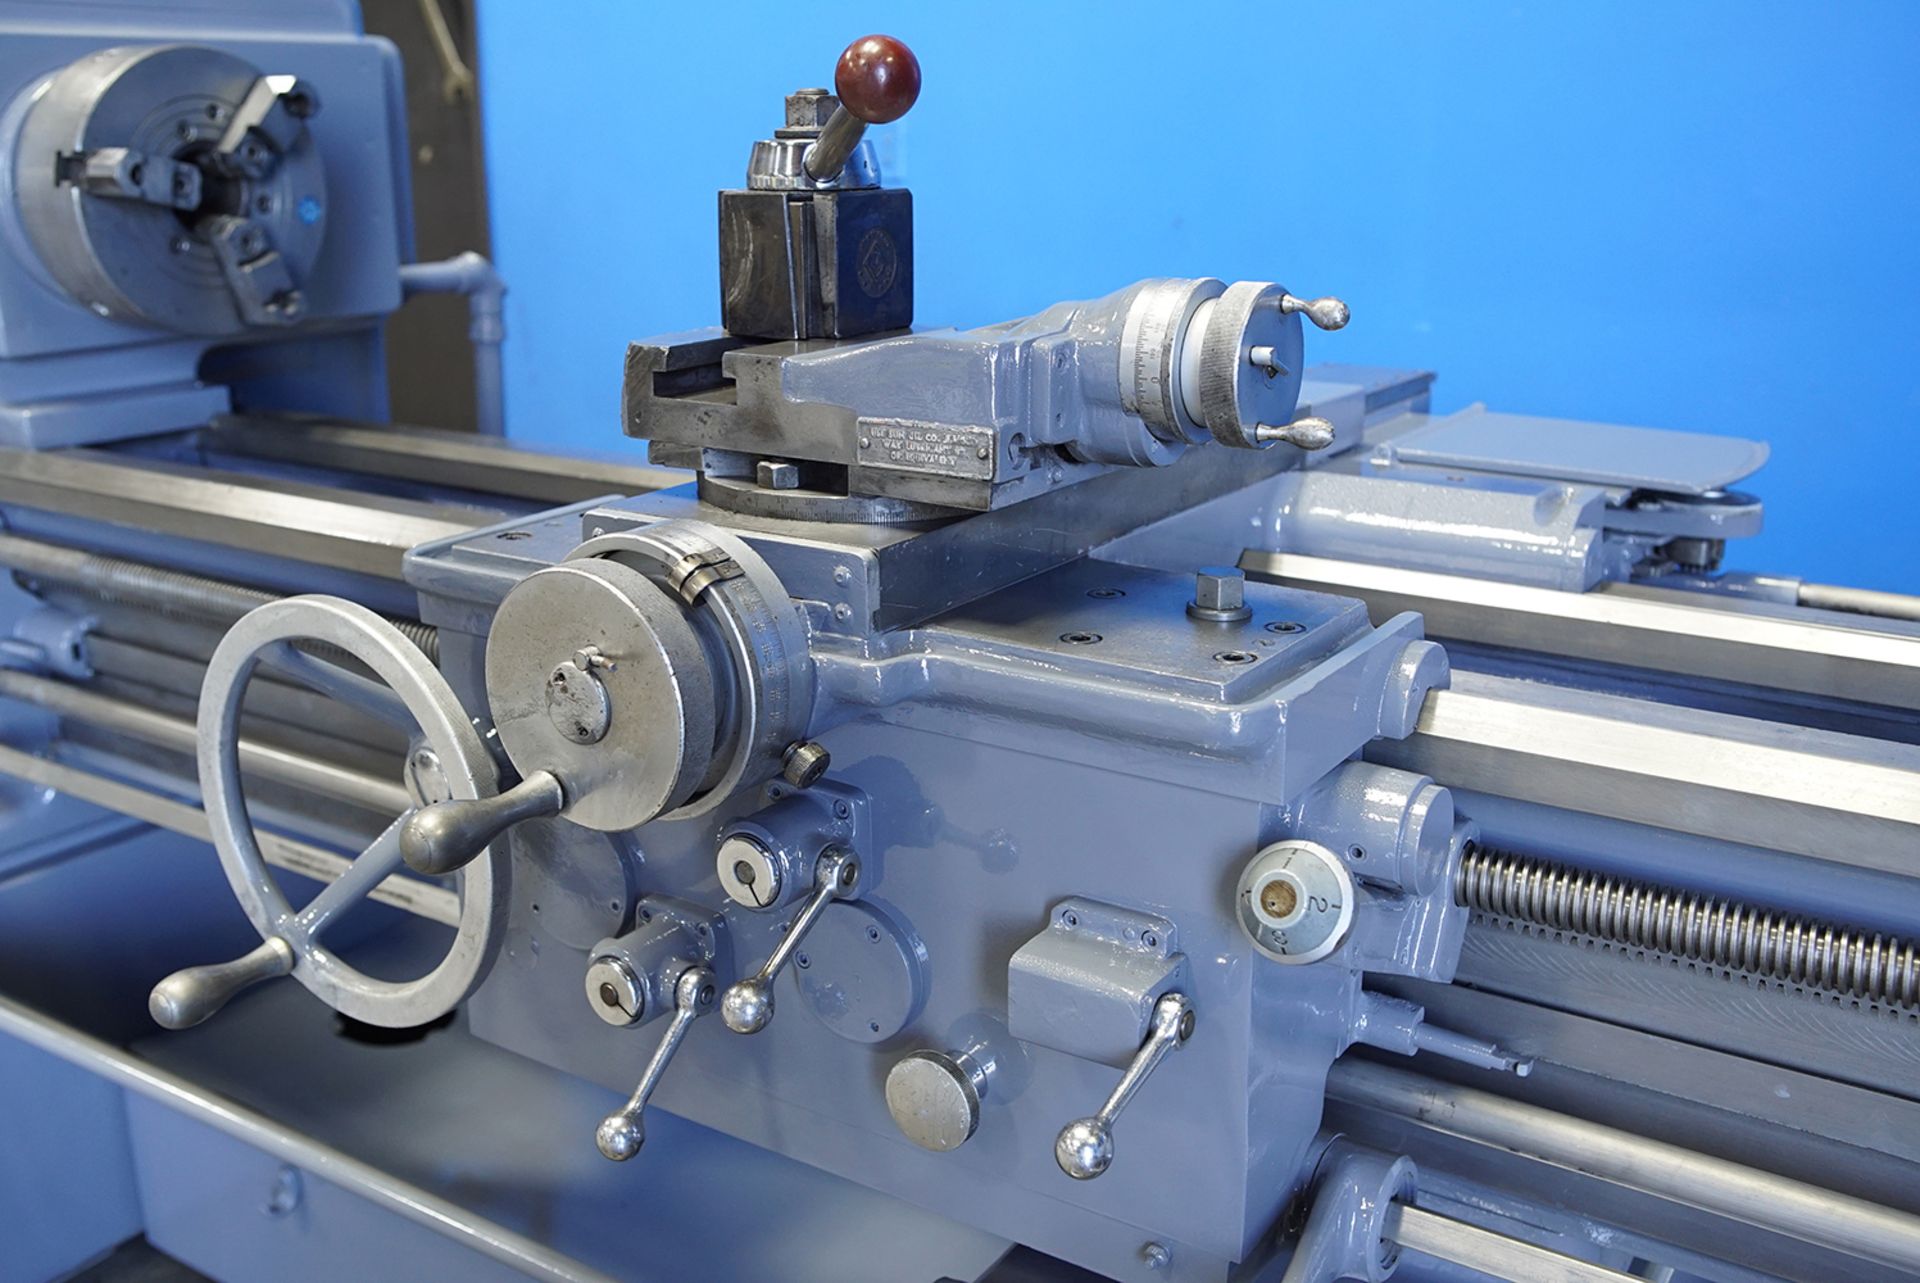 Monarch - Engine Lathe | 16" x 102", Located In Huntington Park, CA - #6430JVHP - Image 8 of 10